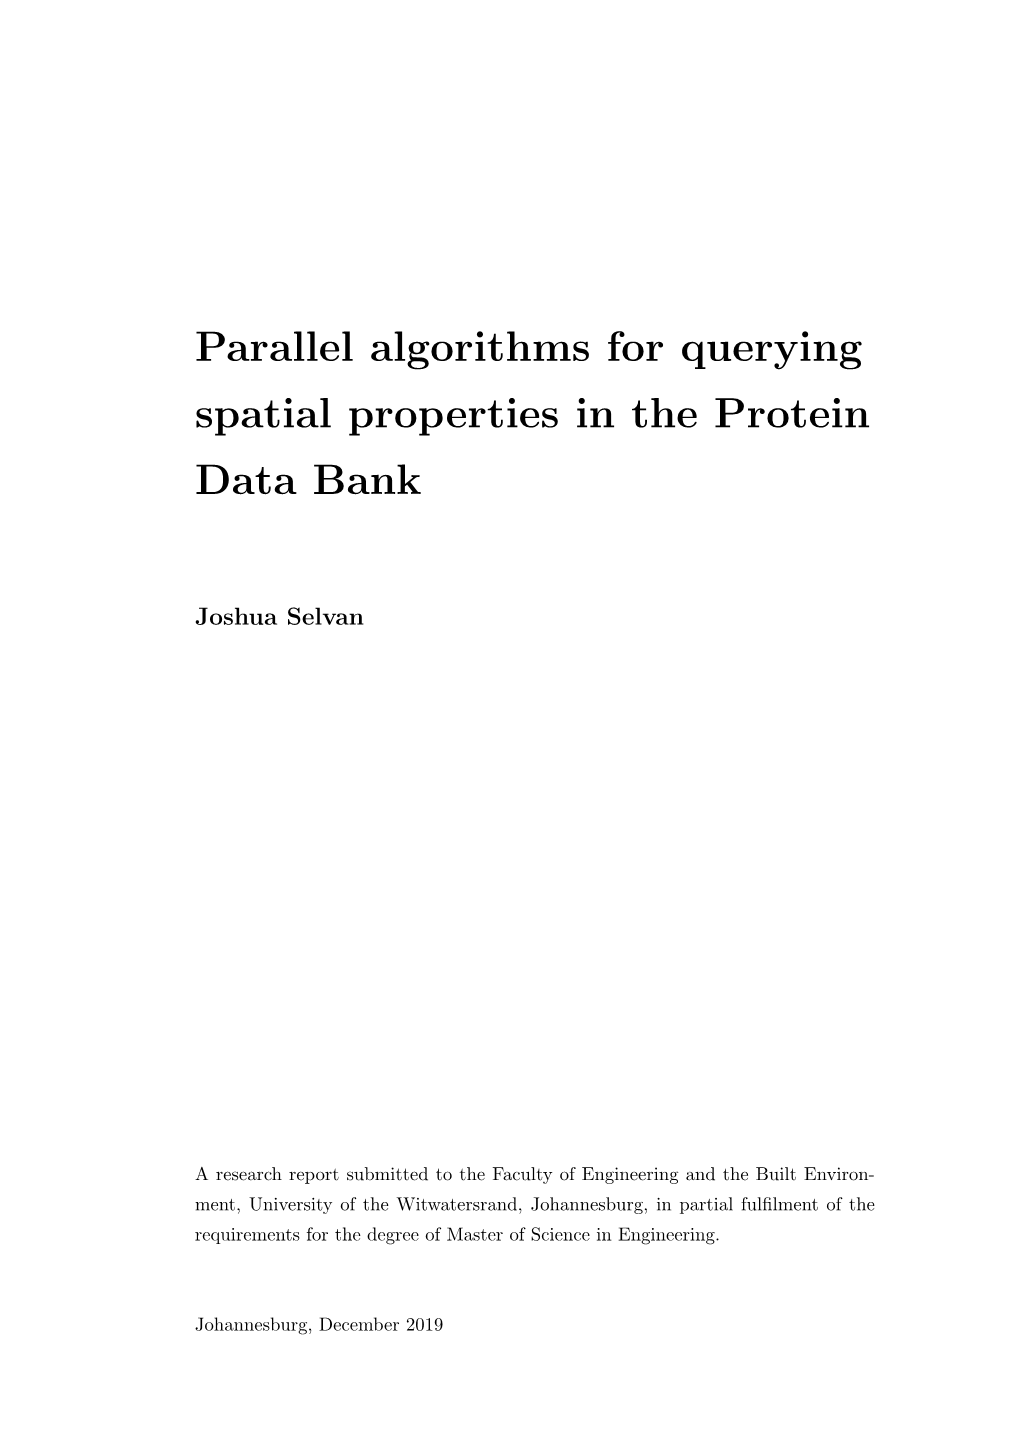 Parallel Algorithms for Querying Spatial Properties in the Protein Data Bank